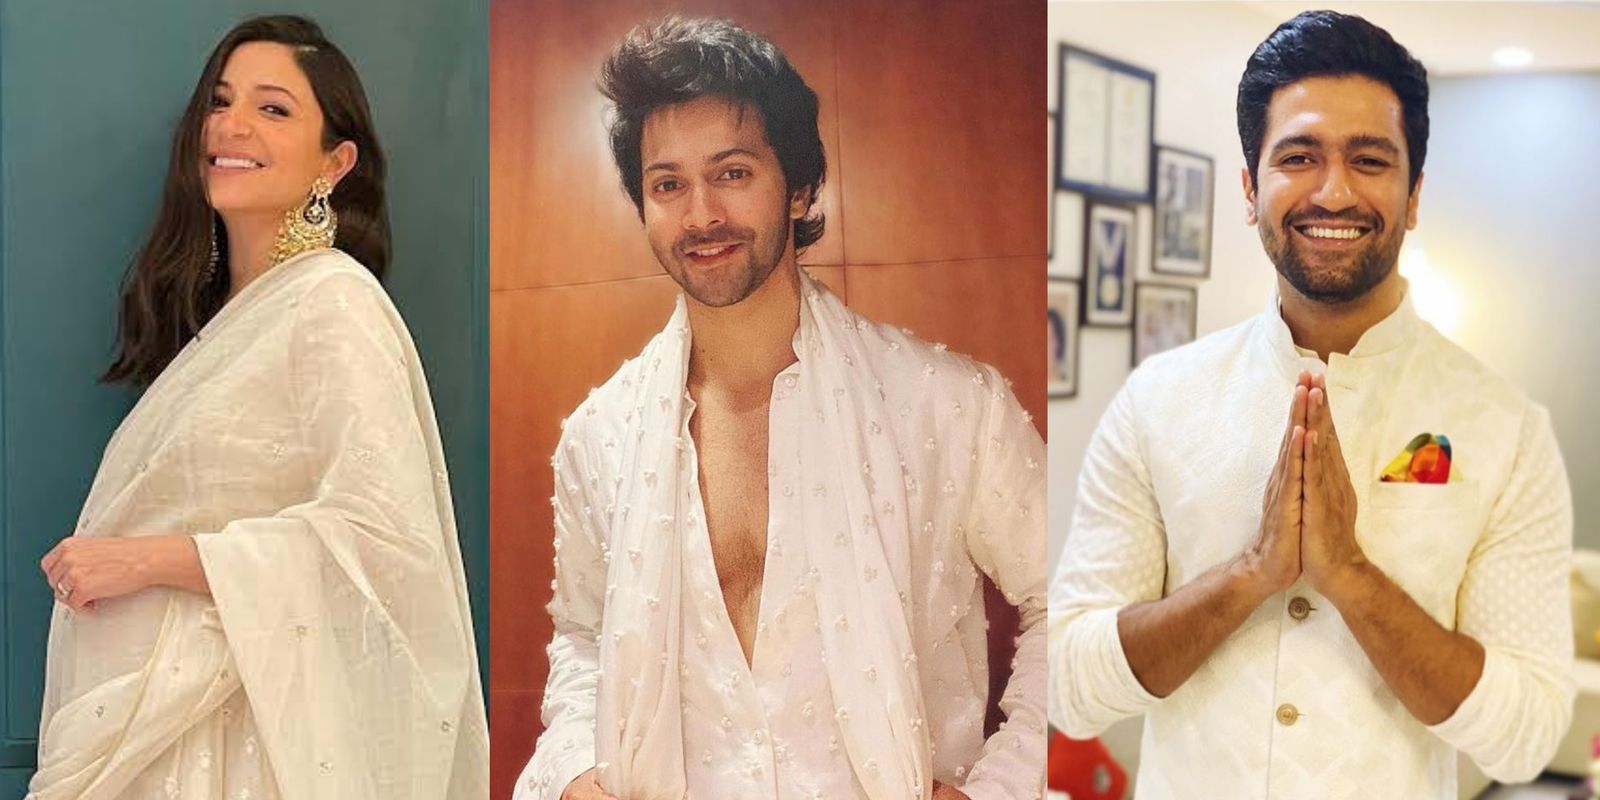 Happy Diwali: Anushka, Varun And Vicky Look Ethereal In White; Sidharth Malhotra Is Glad To Be Back Home